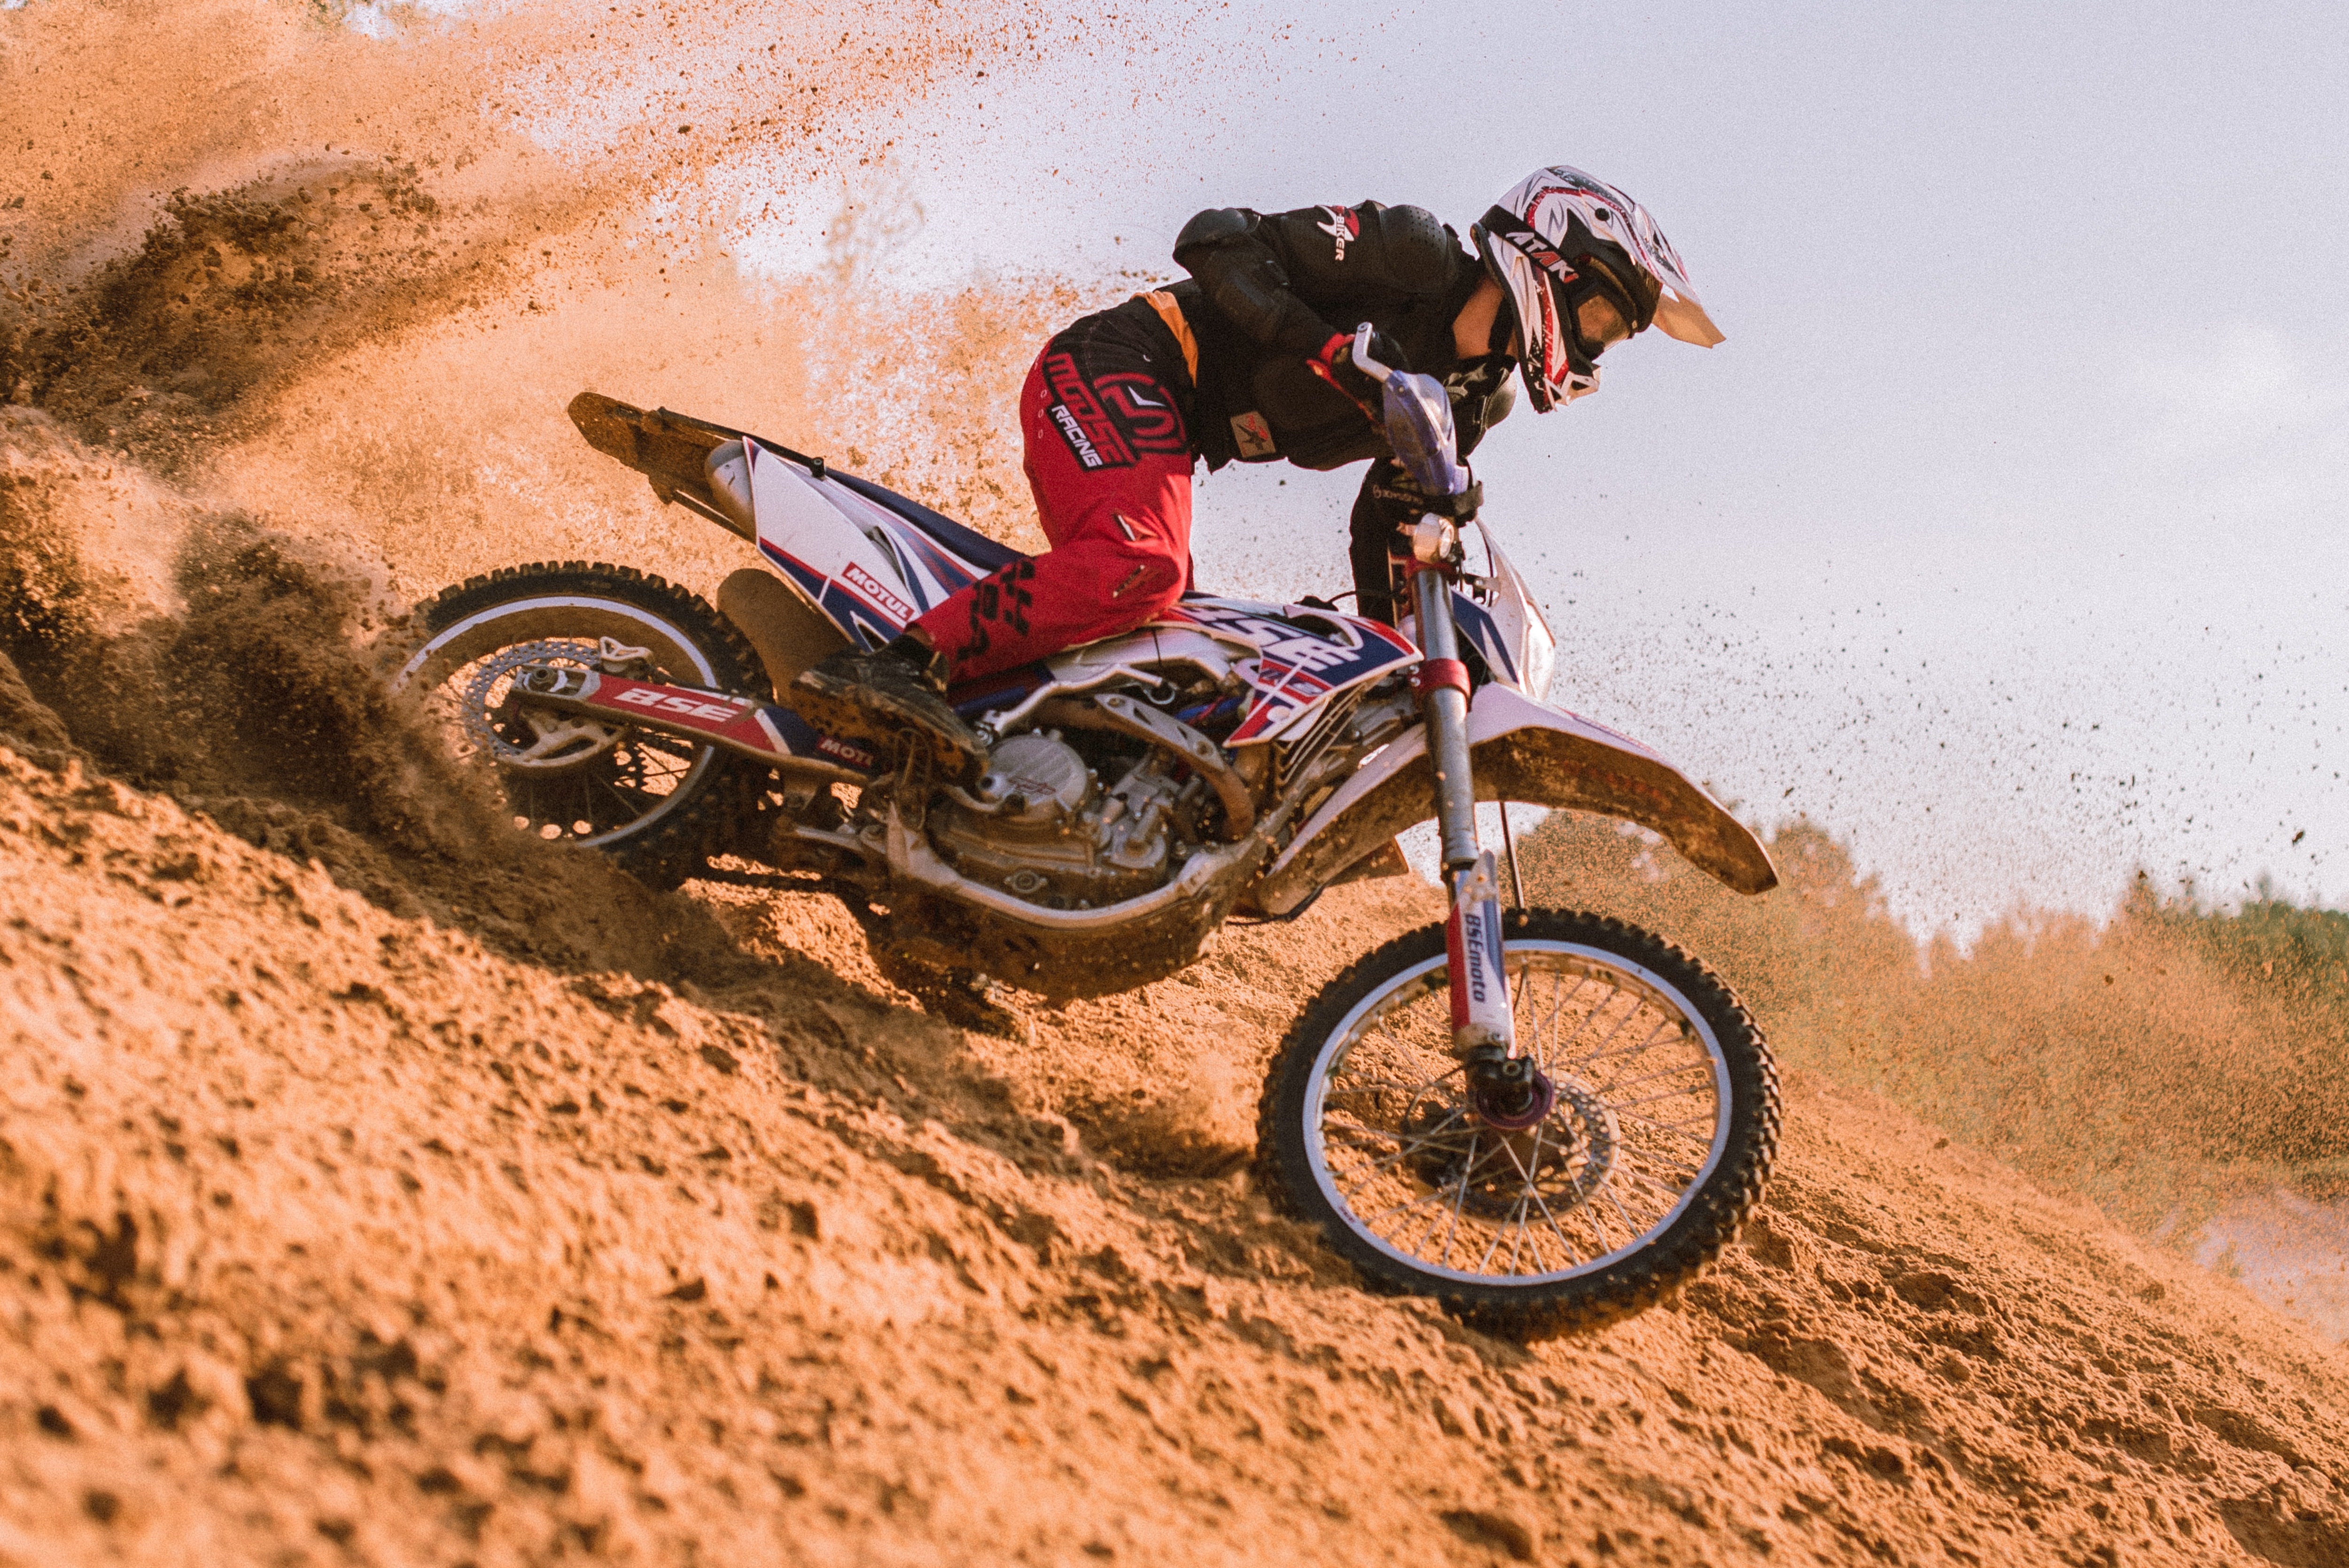 5 Best Motocross Gloves For Off-Road Riders